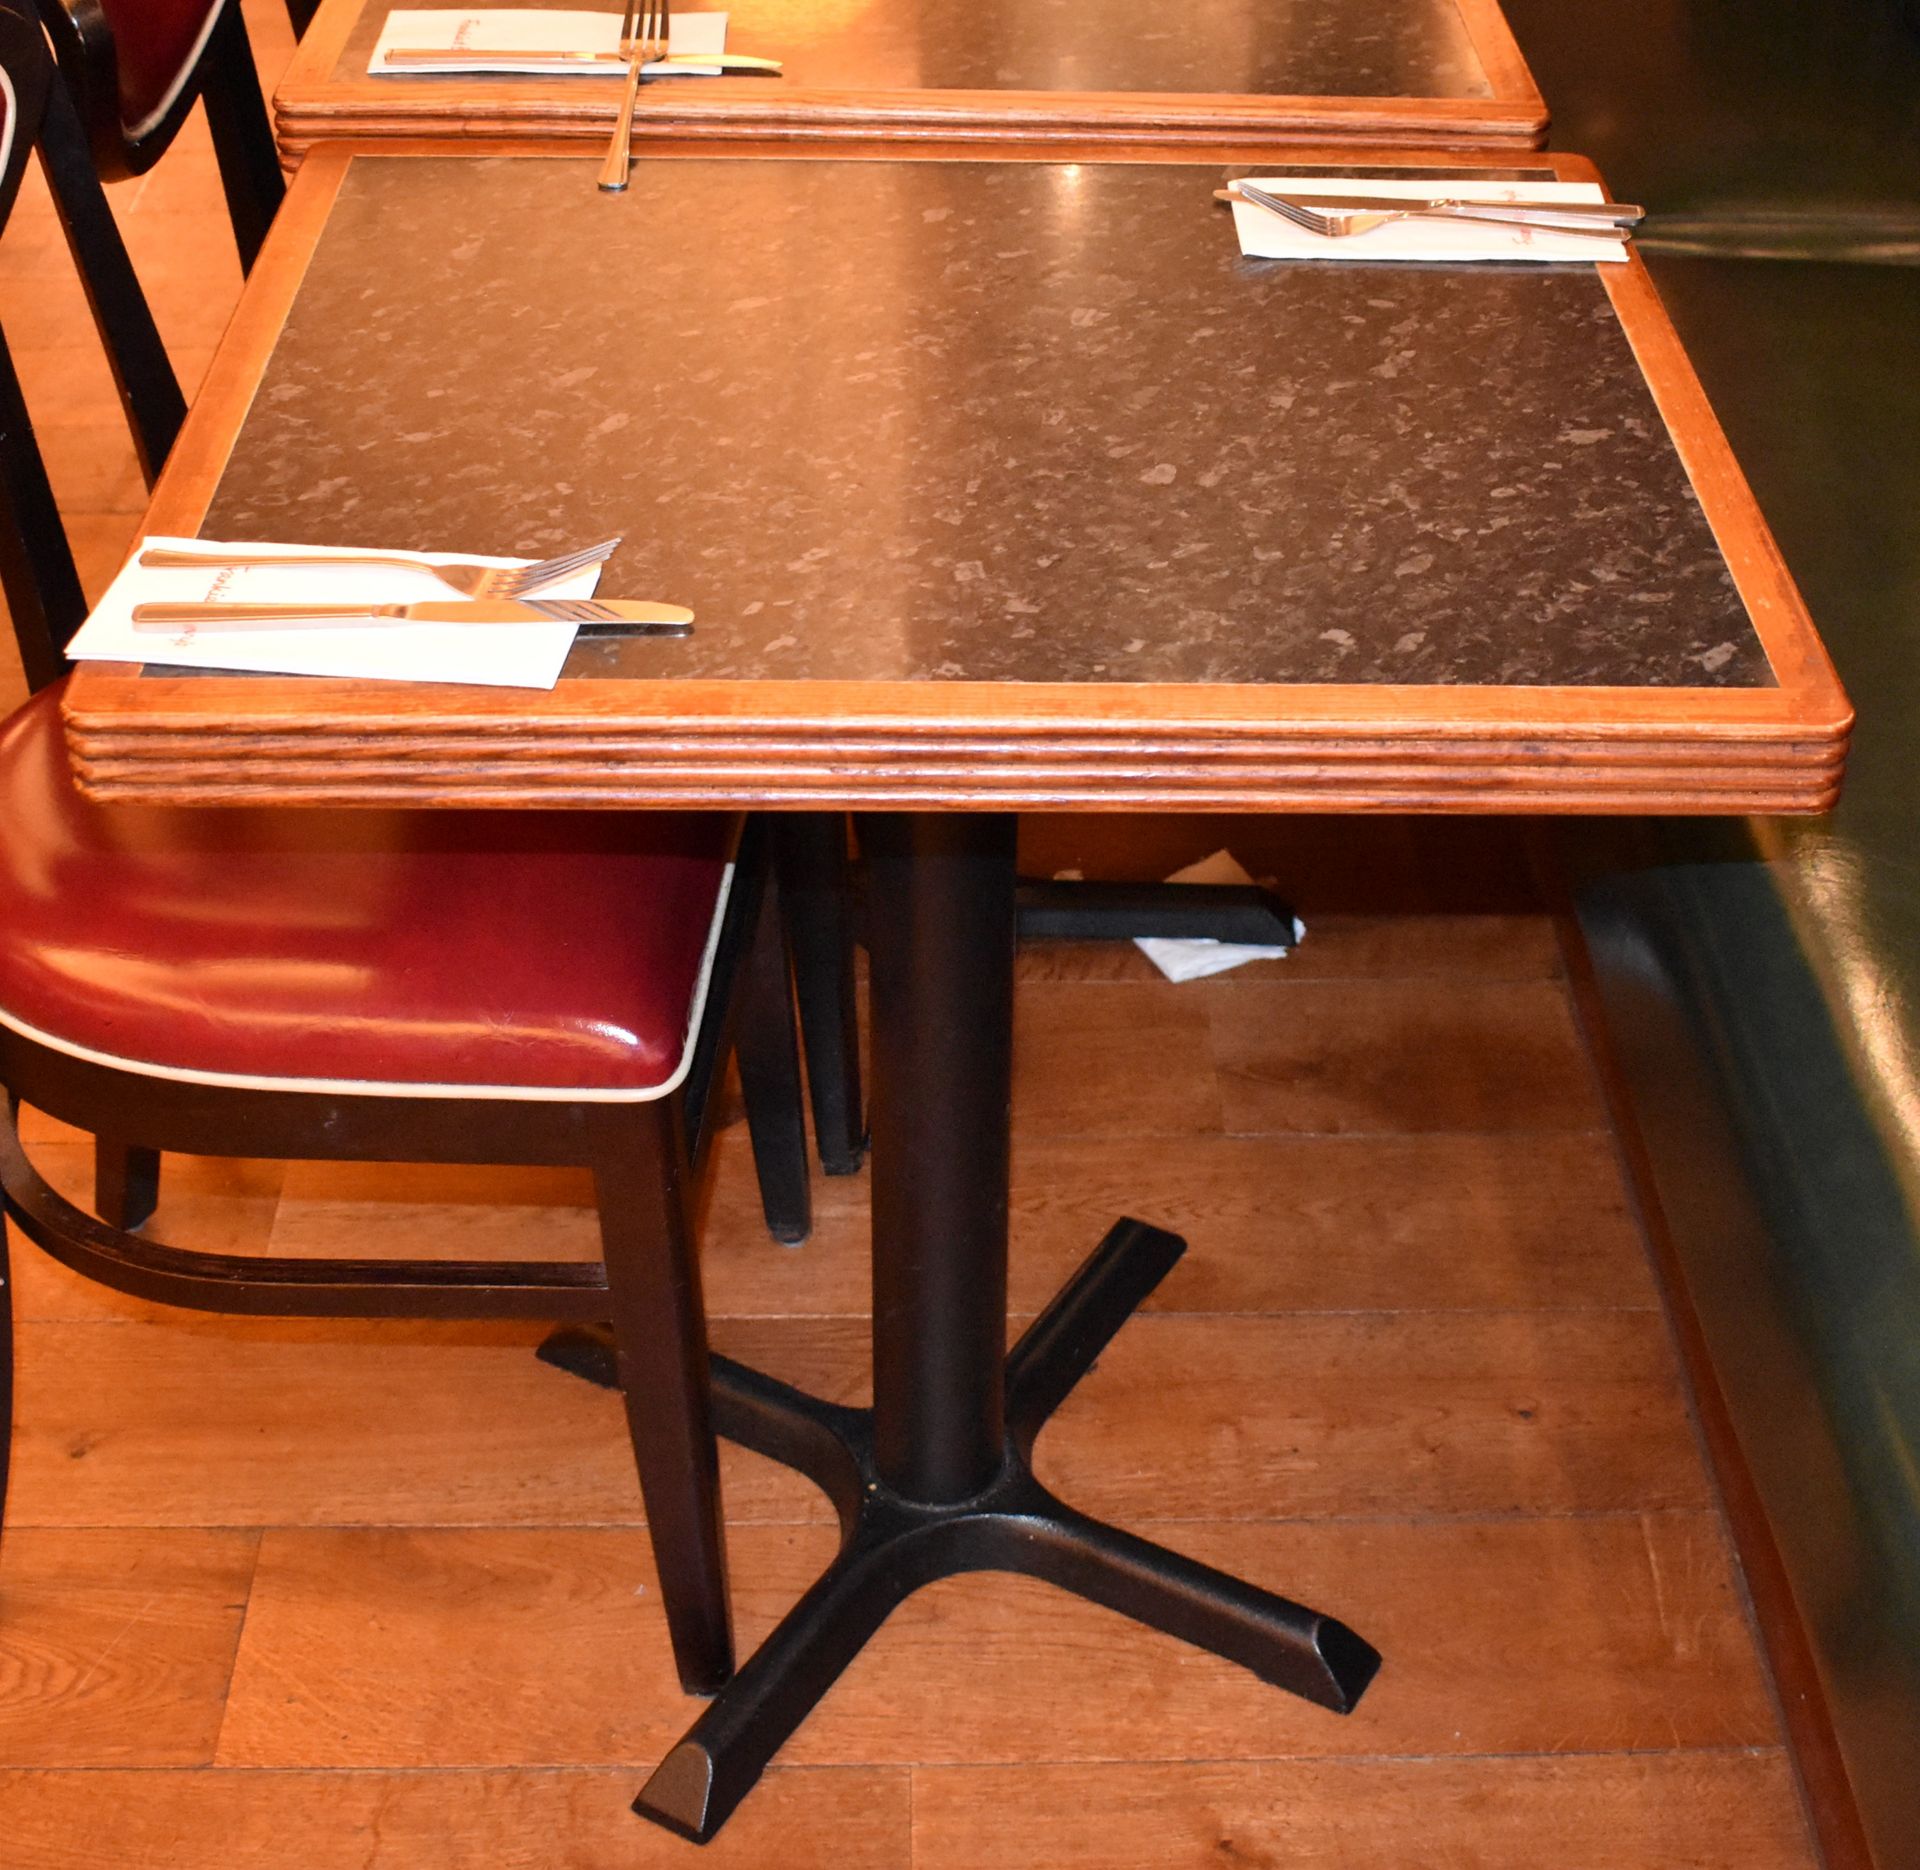 4 x Restaurant Bistro Tables With Granite Effect Tops and Cast Iron Bases - From American Italian - Image 4 of 7